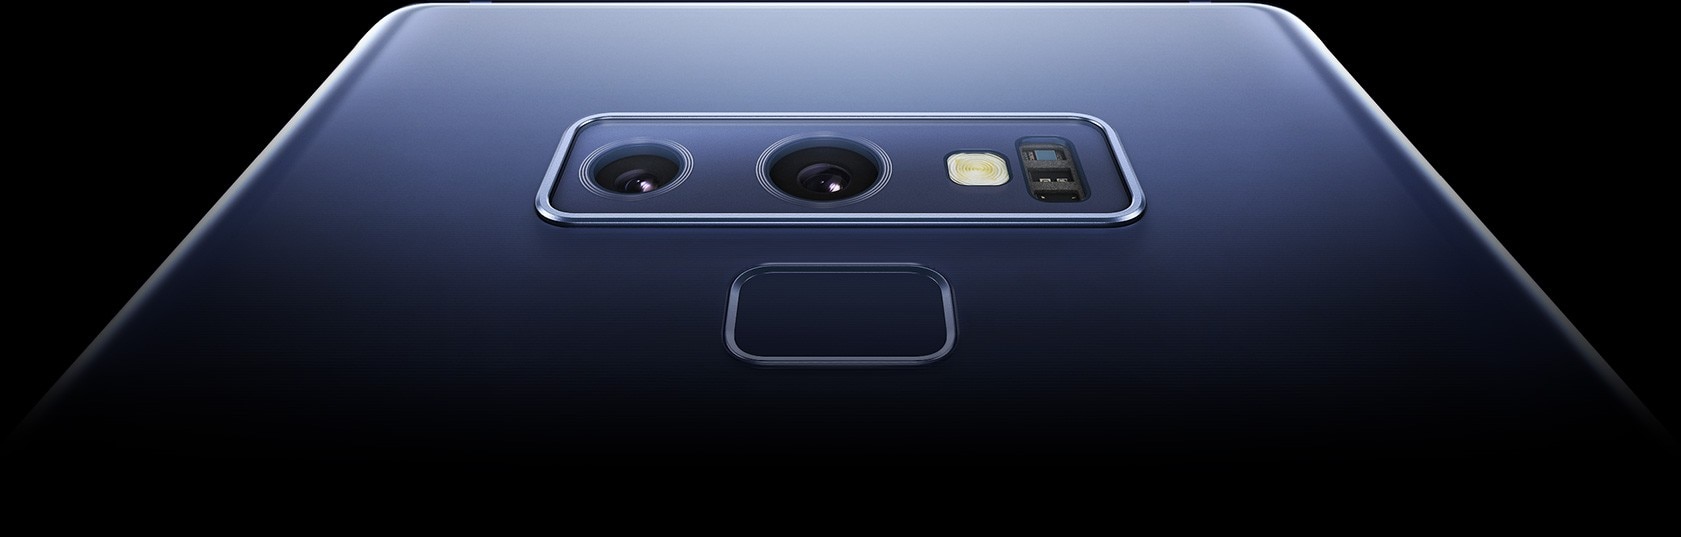 Close Up of Rear Dual Cameras, Lenses, and Flash for Samsung Galaxy Note9 Phone